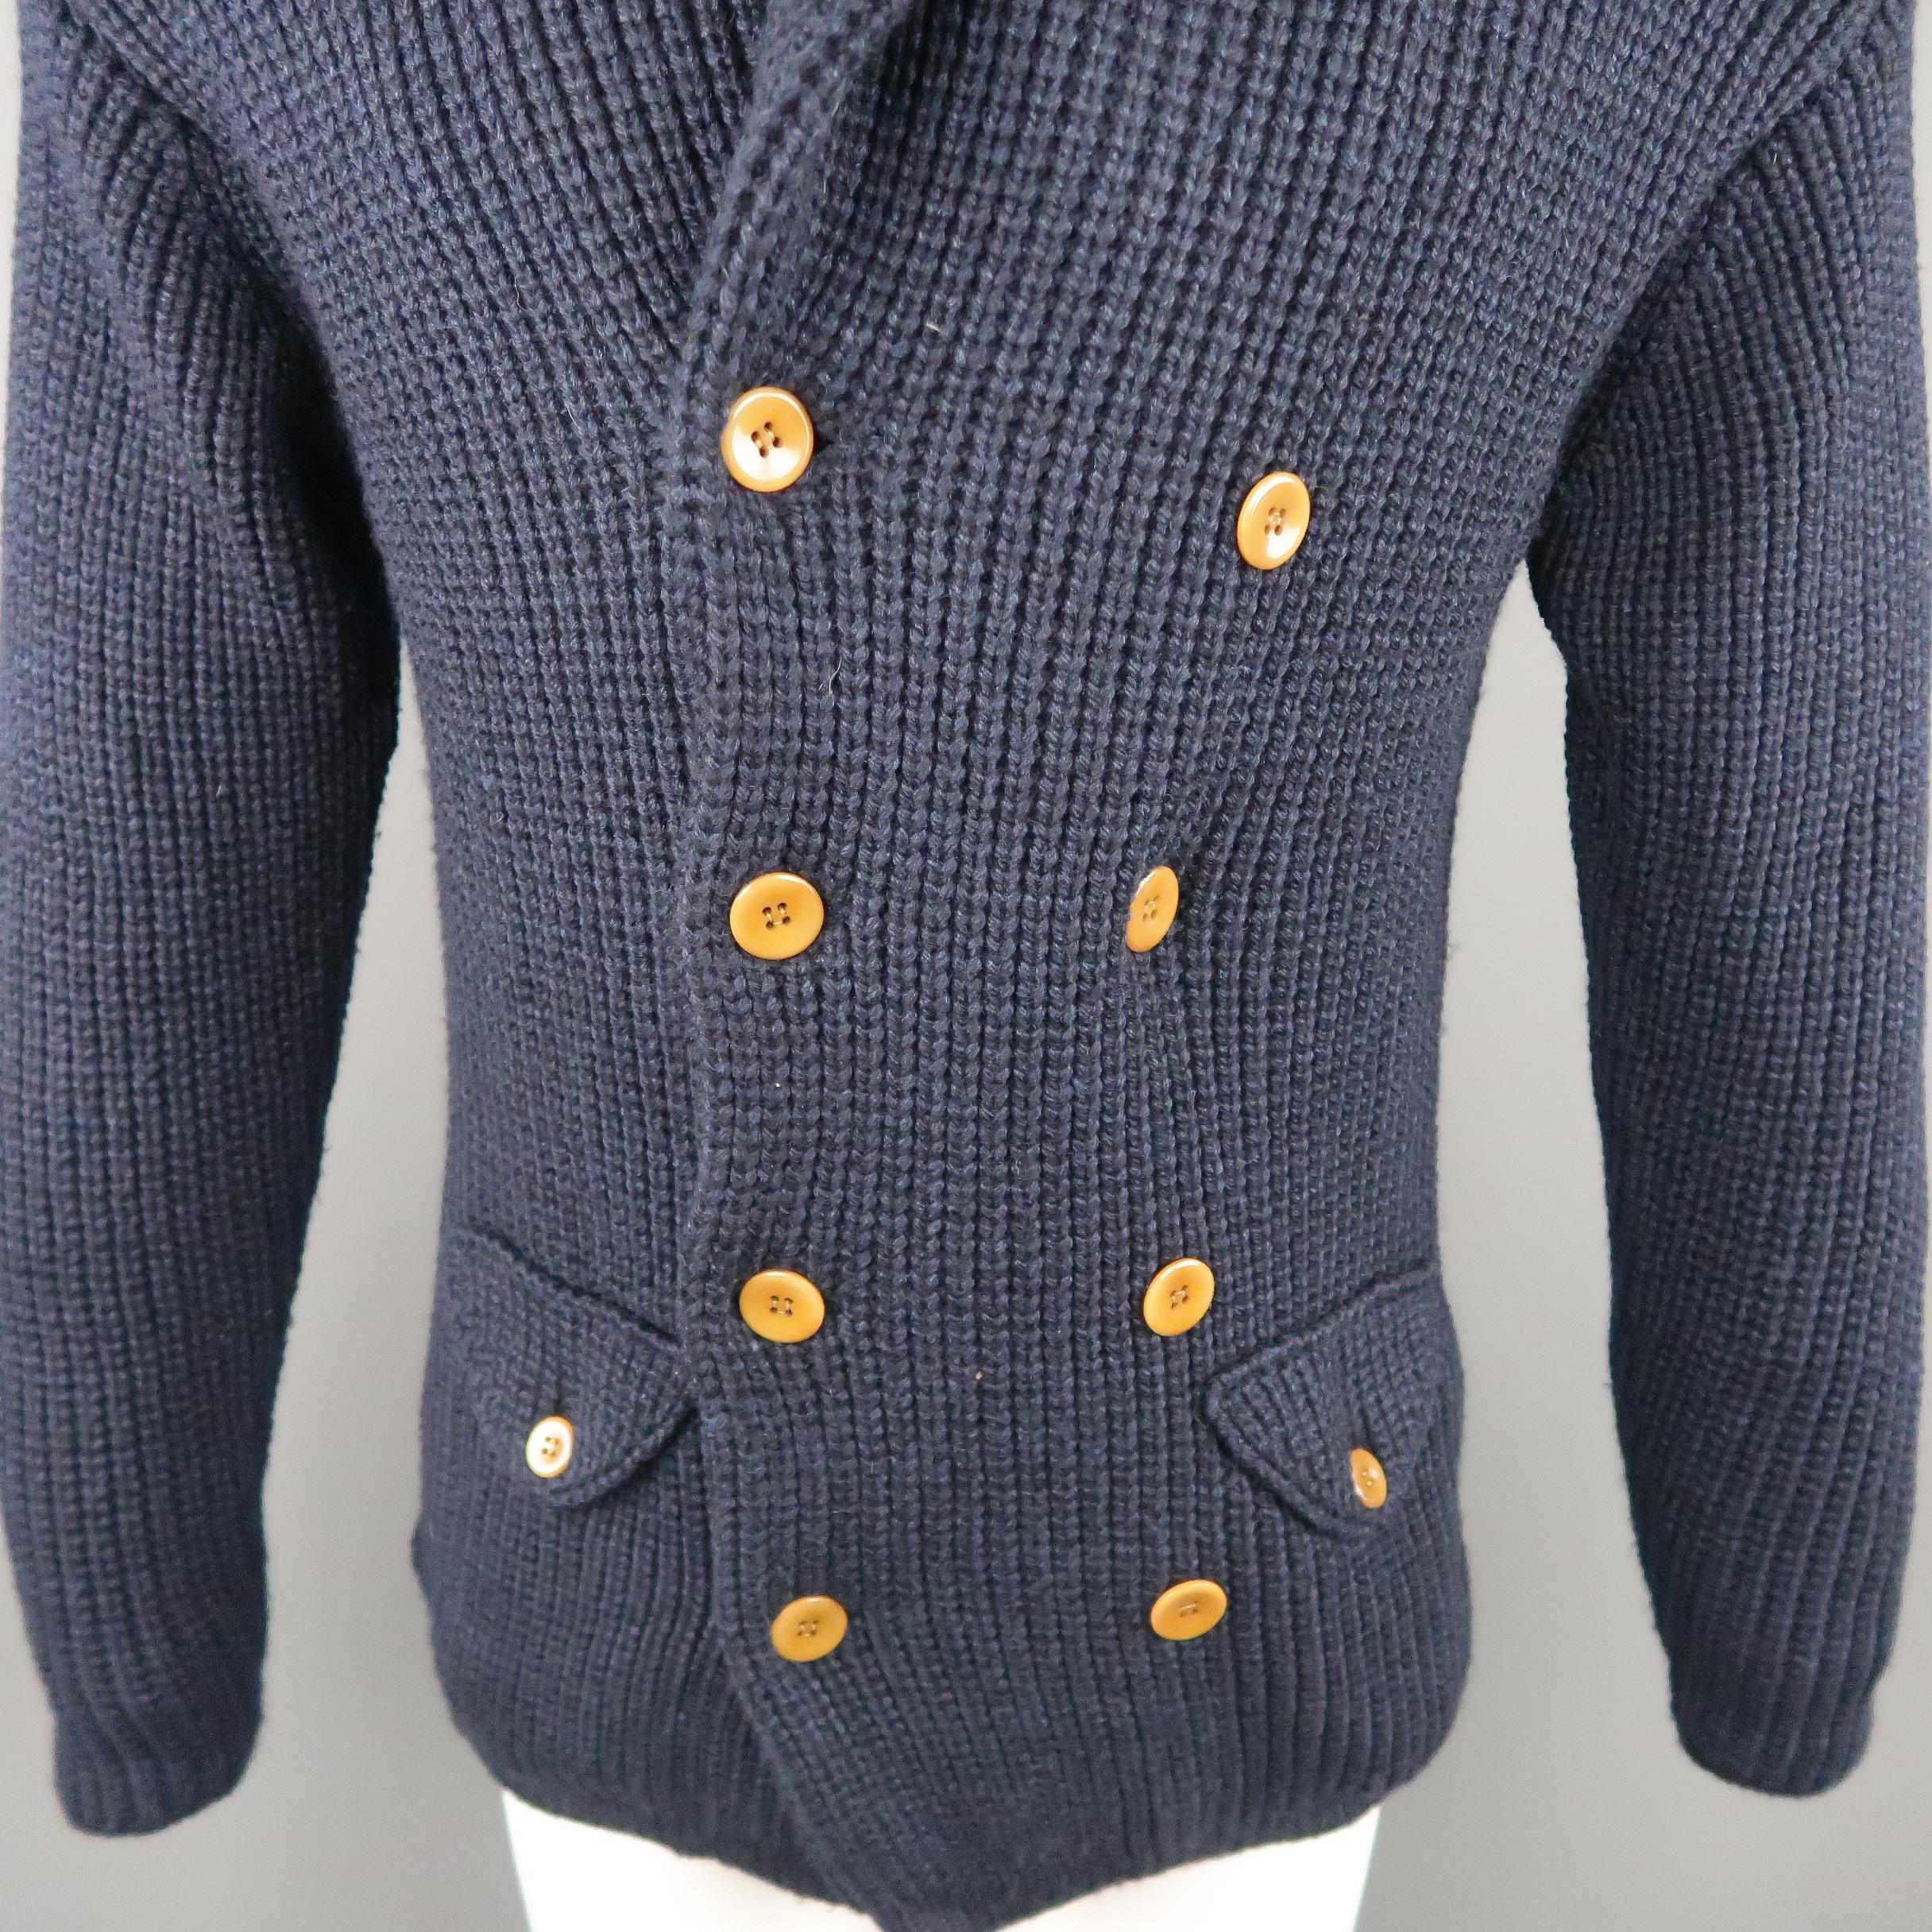 HAVER SACK cardigan comes in a heavy wool blend knit with a shawl collar, double breasted button up front, and flap pockets at waist. Made in Japan.
 
Excellent Pre-Owned Condition.
Marked: M
 
Measurements:
 
Shoulder: 21 in.
Chest: 42 in.
Sleeve: